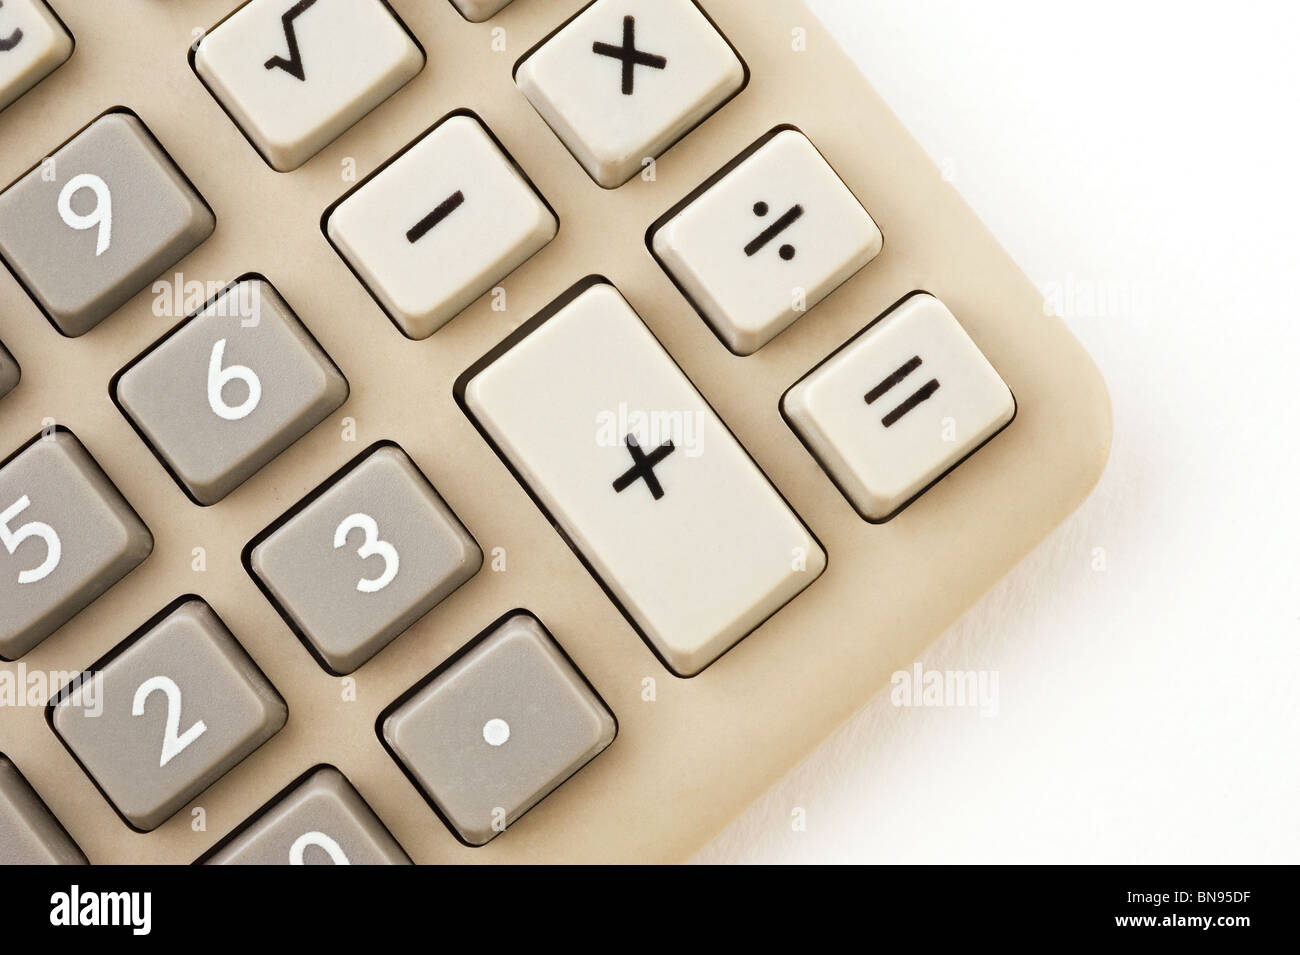 Electronic calculator isolated on a white background Stock Photo